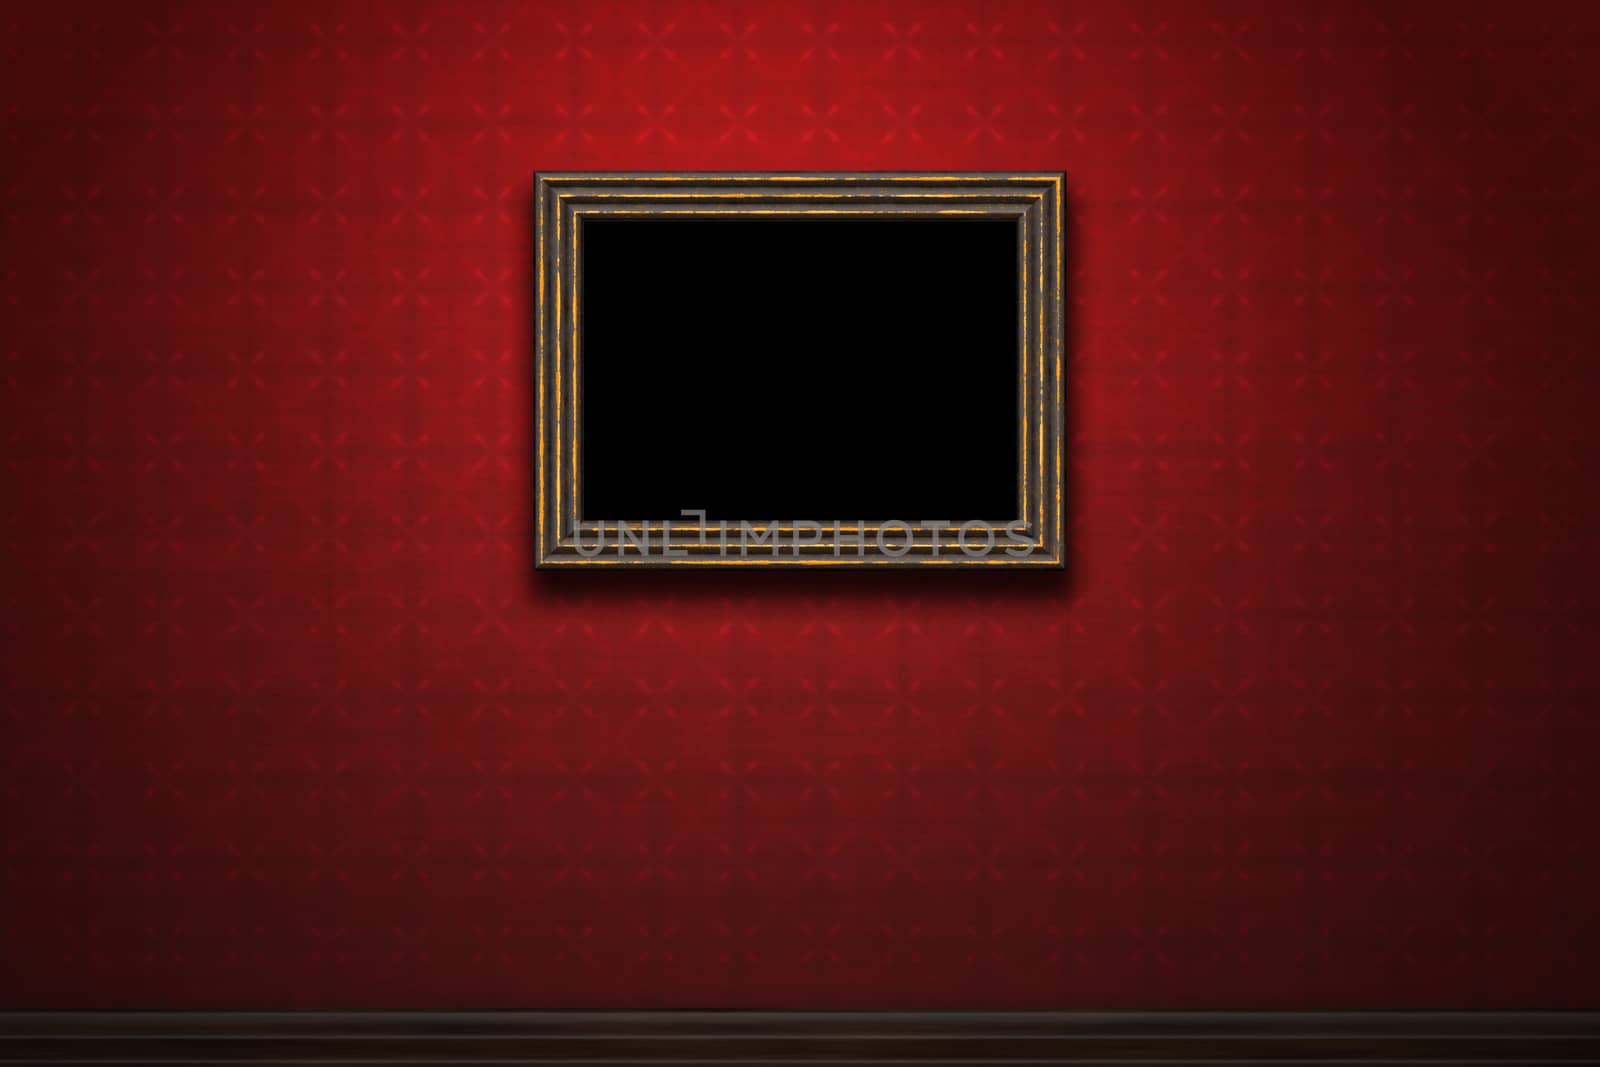 Old wooden frame on red retro grunge wall